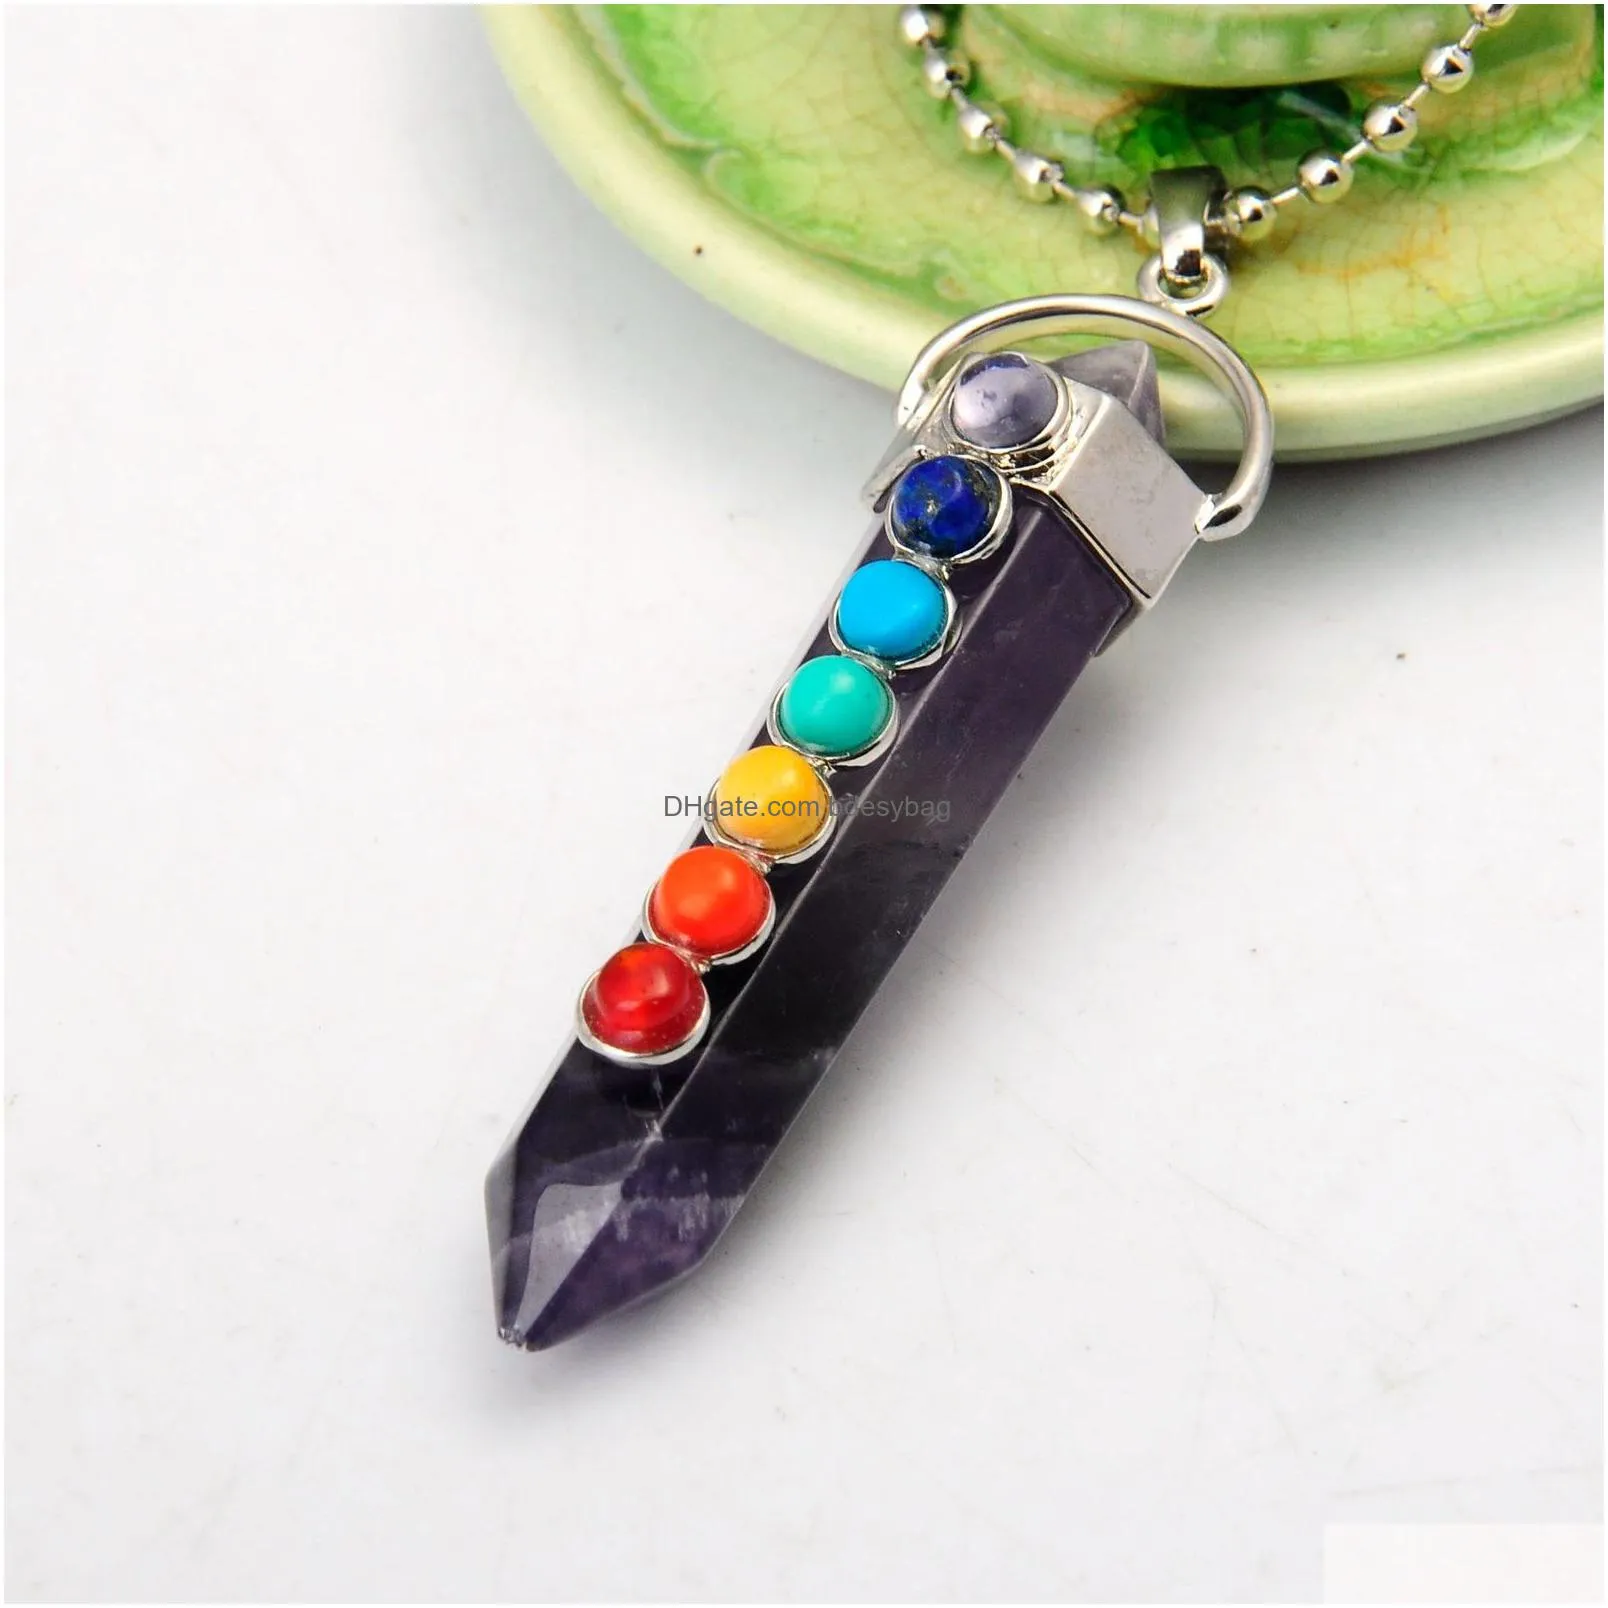 wholesales 2018 new style natural amethsyt reiki power gemstone necklace pendant with 7 crystal and silver findings 1pcs for fashion